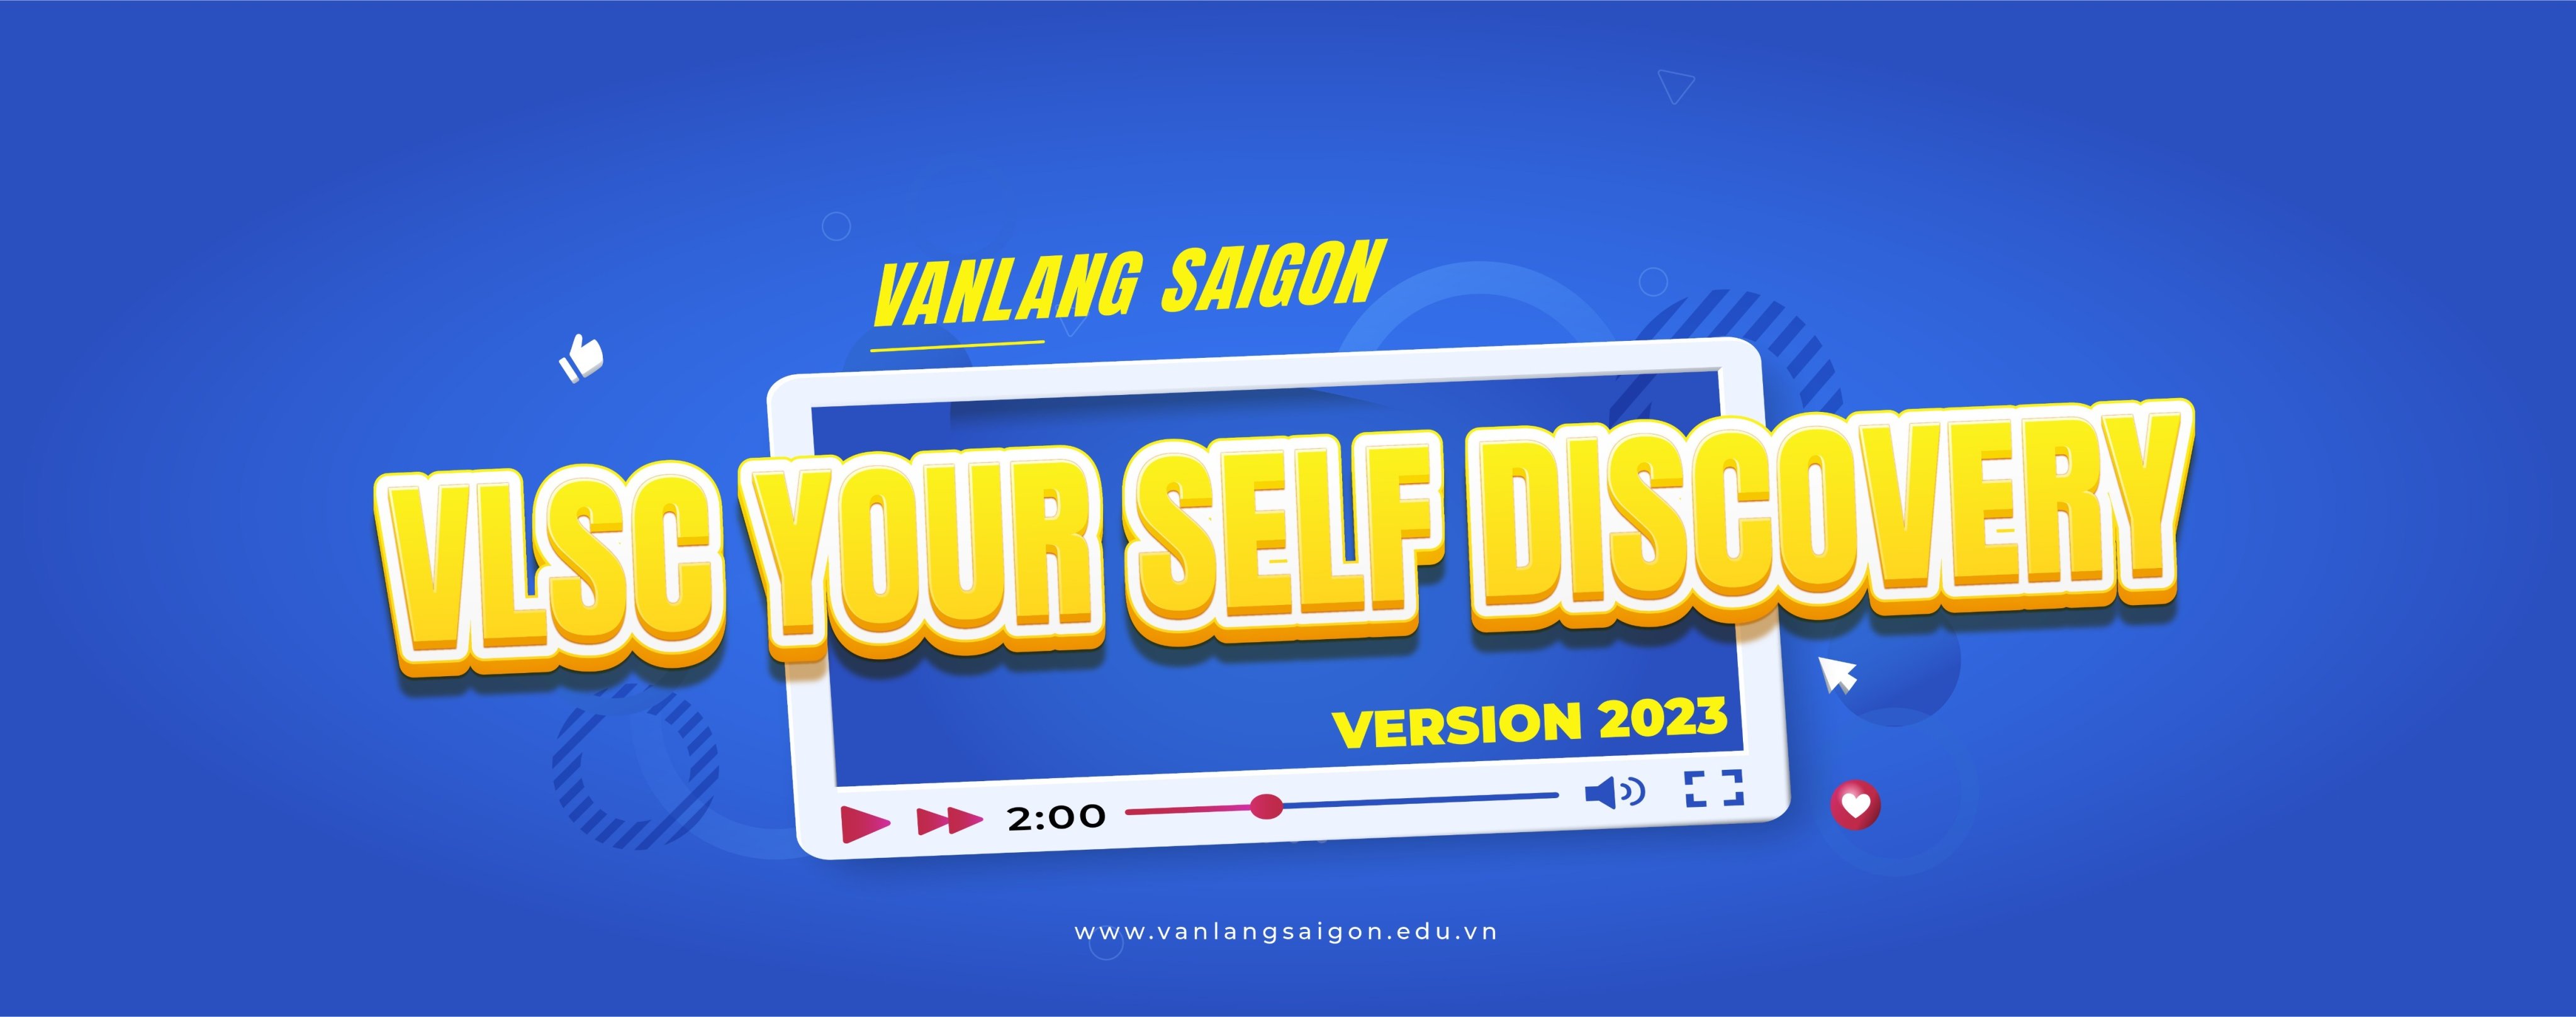 VLSC YOUR SELF - DISCOVERY SỐ 3